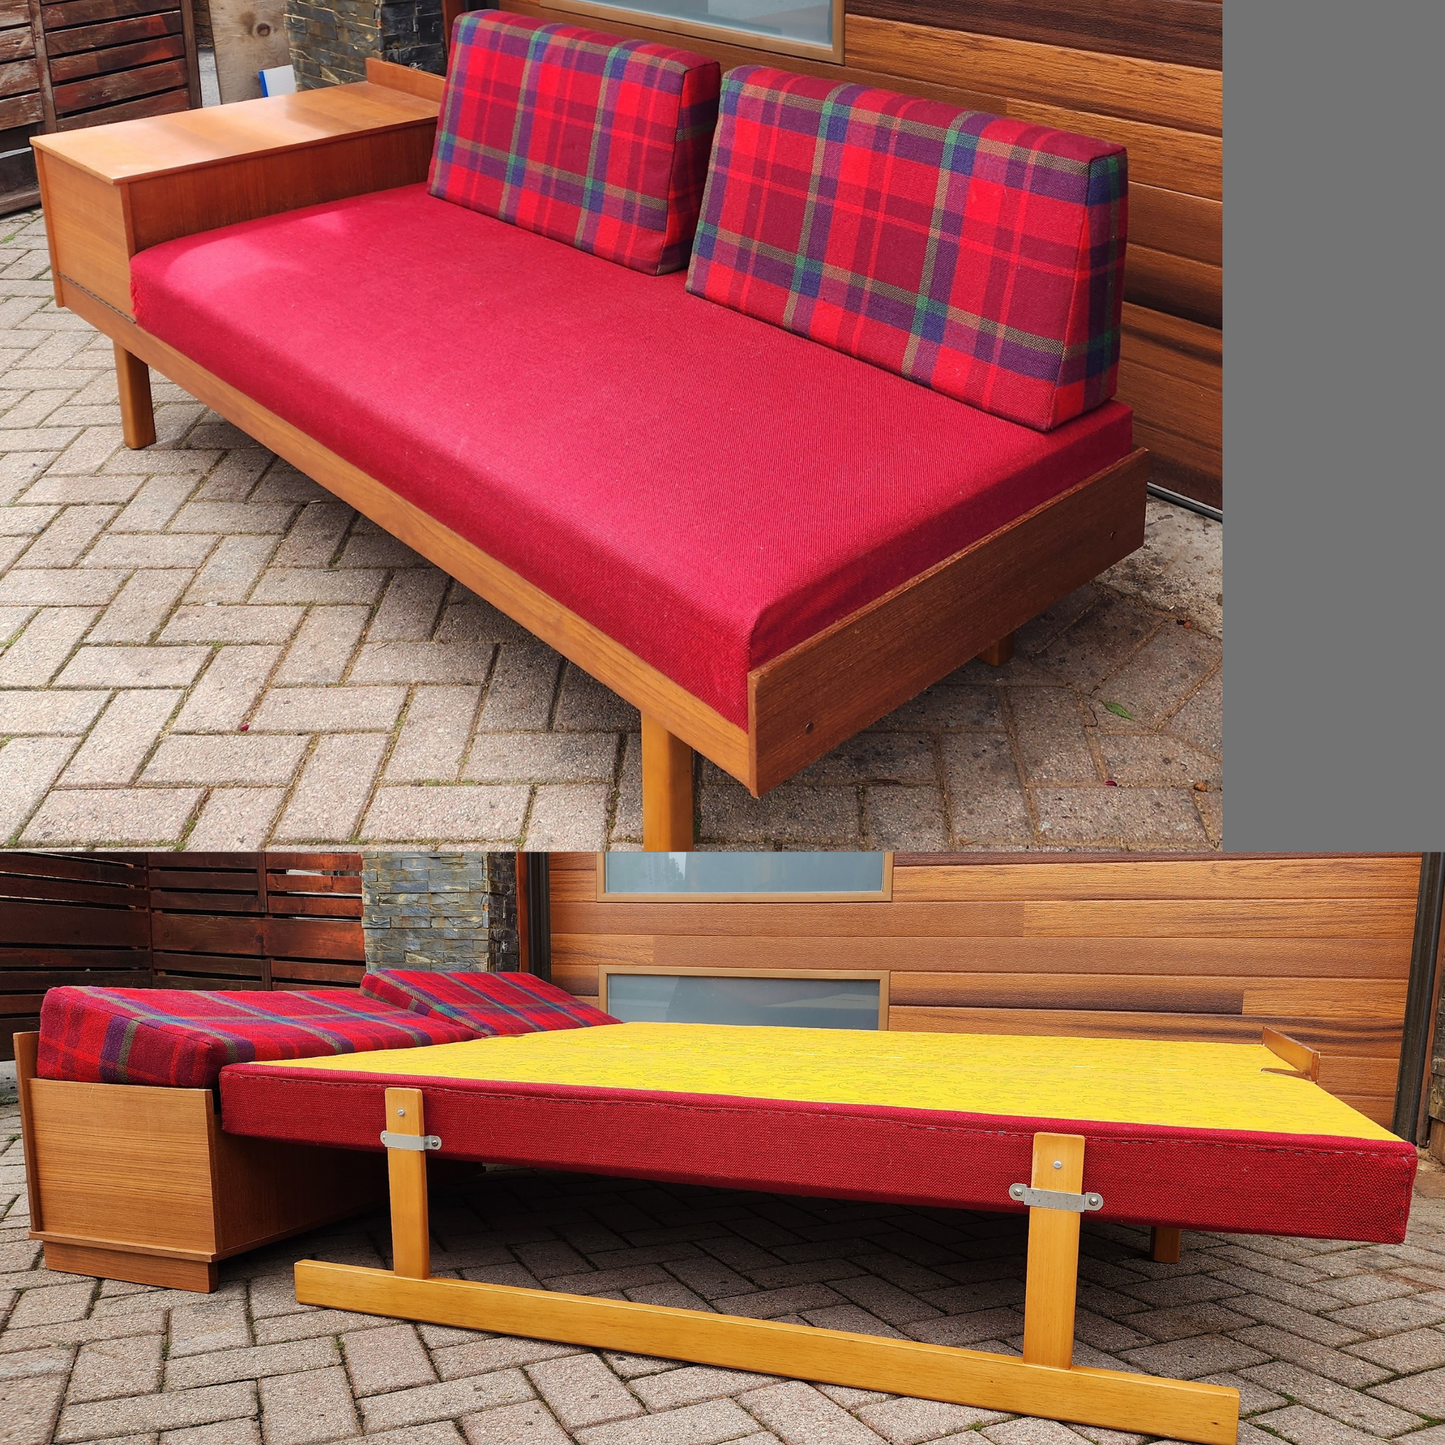 REFINISHED Mid Century Modern Teak Sofa - Bed by Hove Mobler